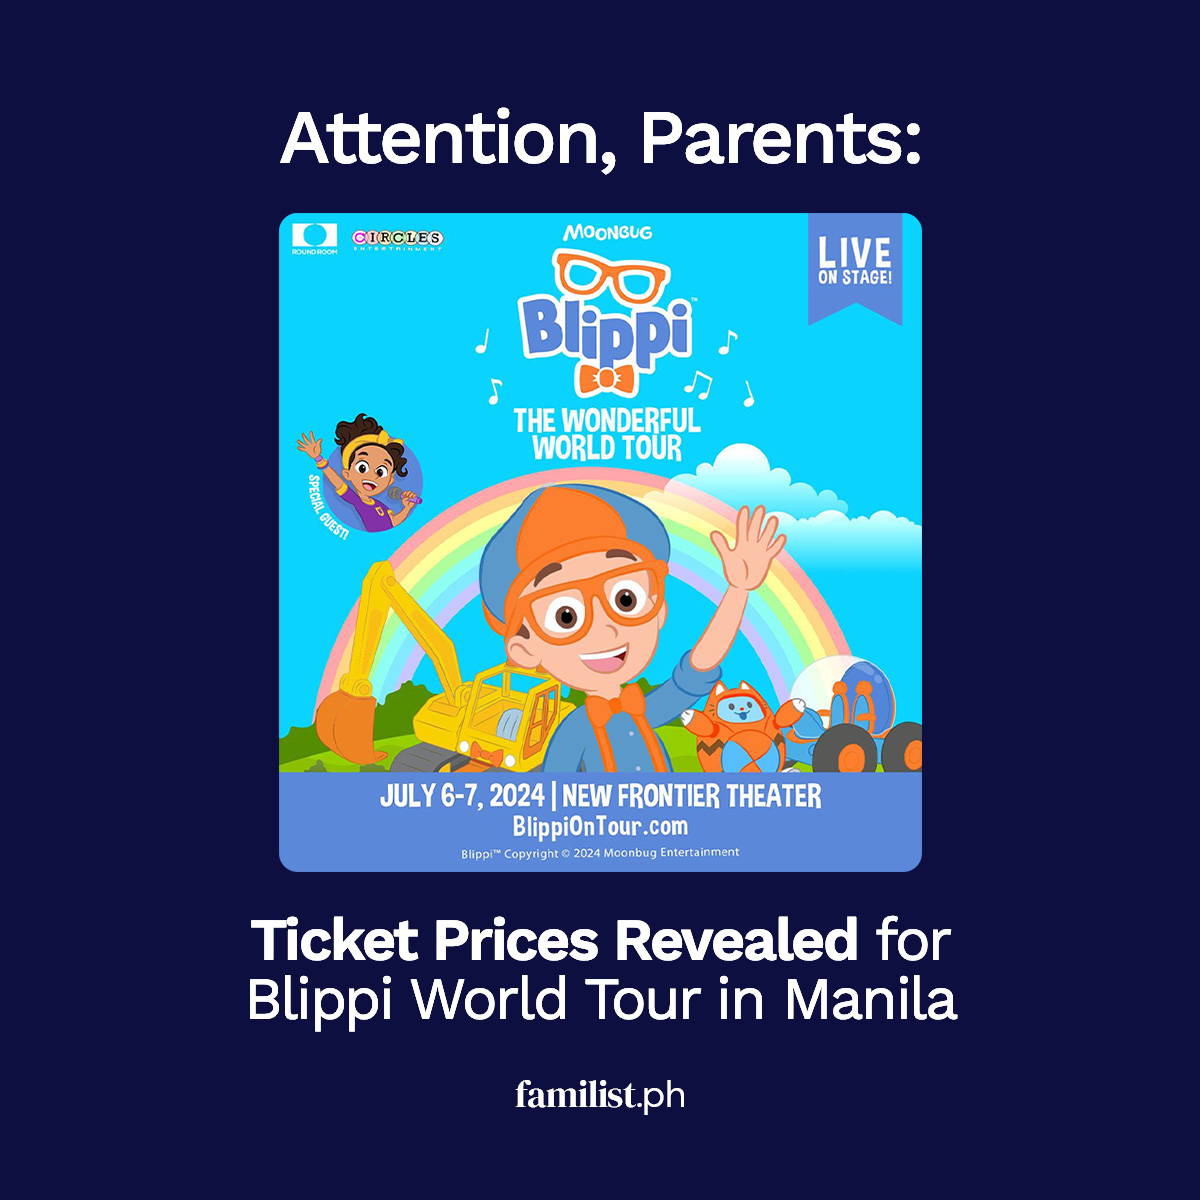 Attention, Parents: Ticket Prices Revealed for Blippi World Tour in Manila